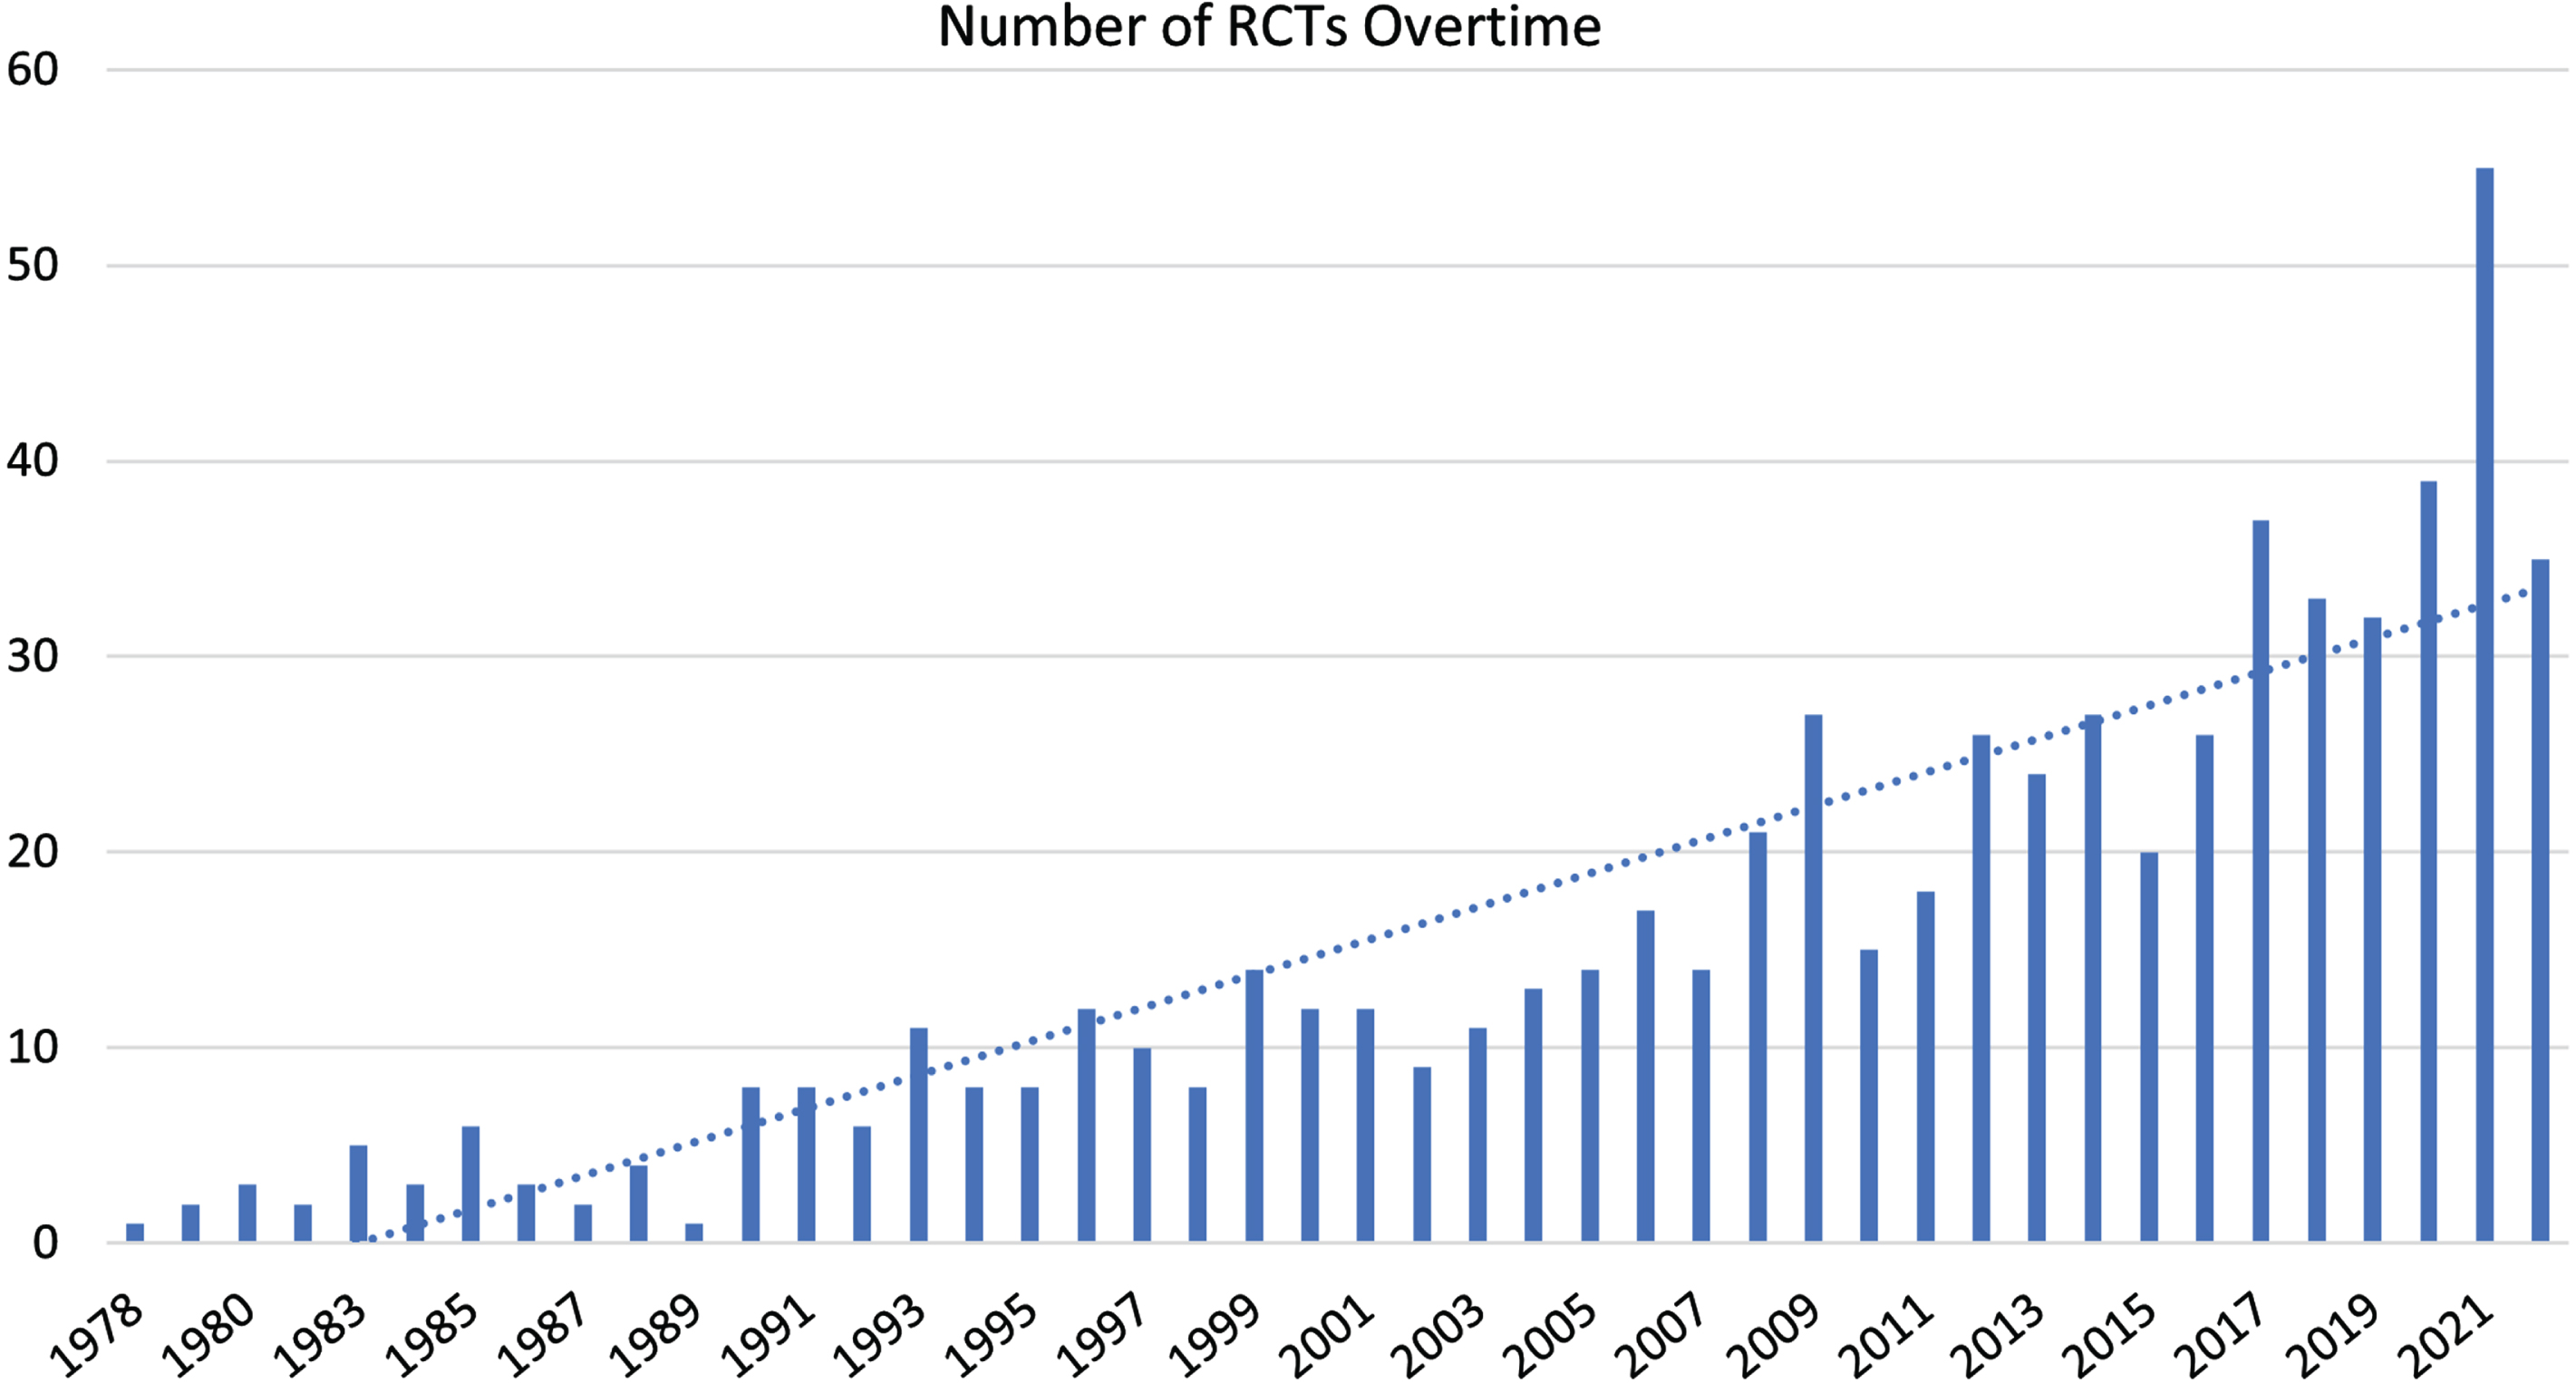 Number of RCTs of moderate to severe TBI published by year.